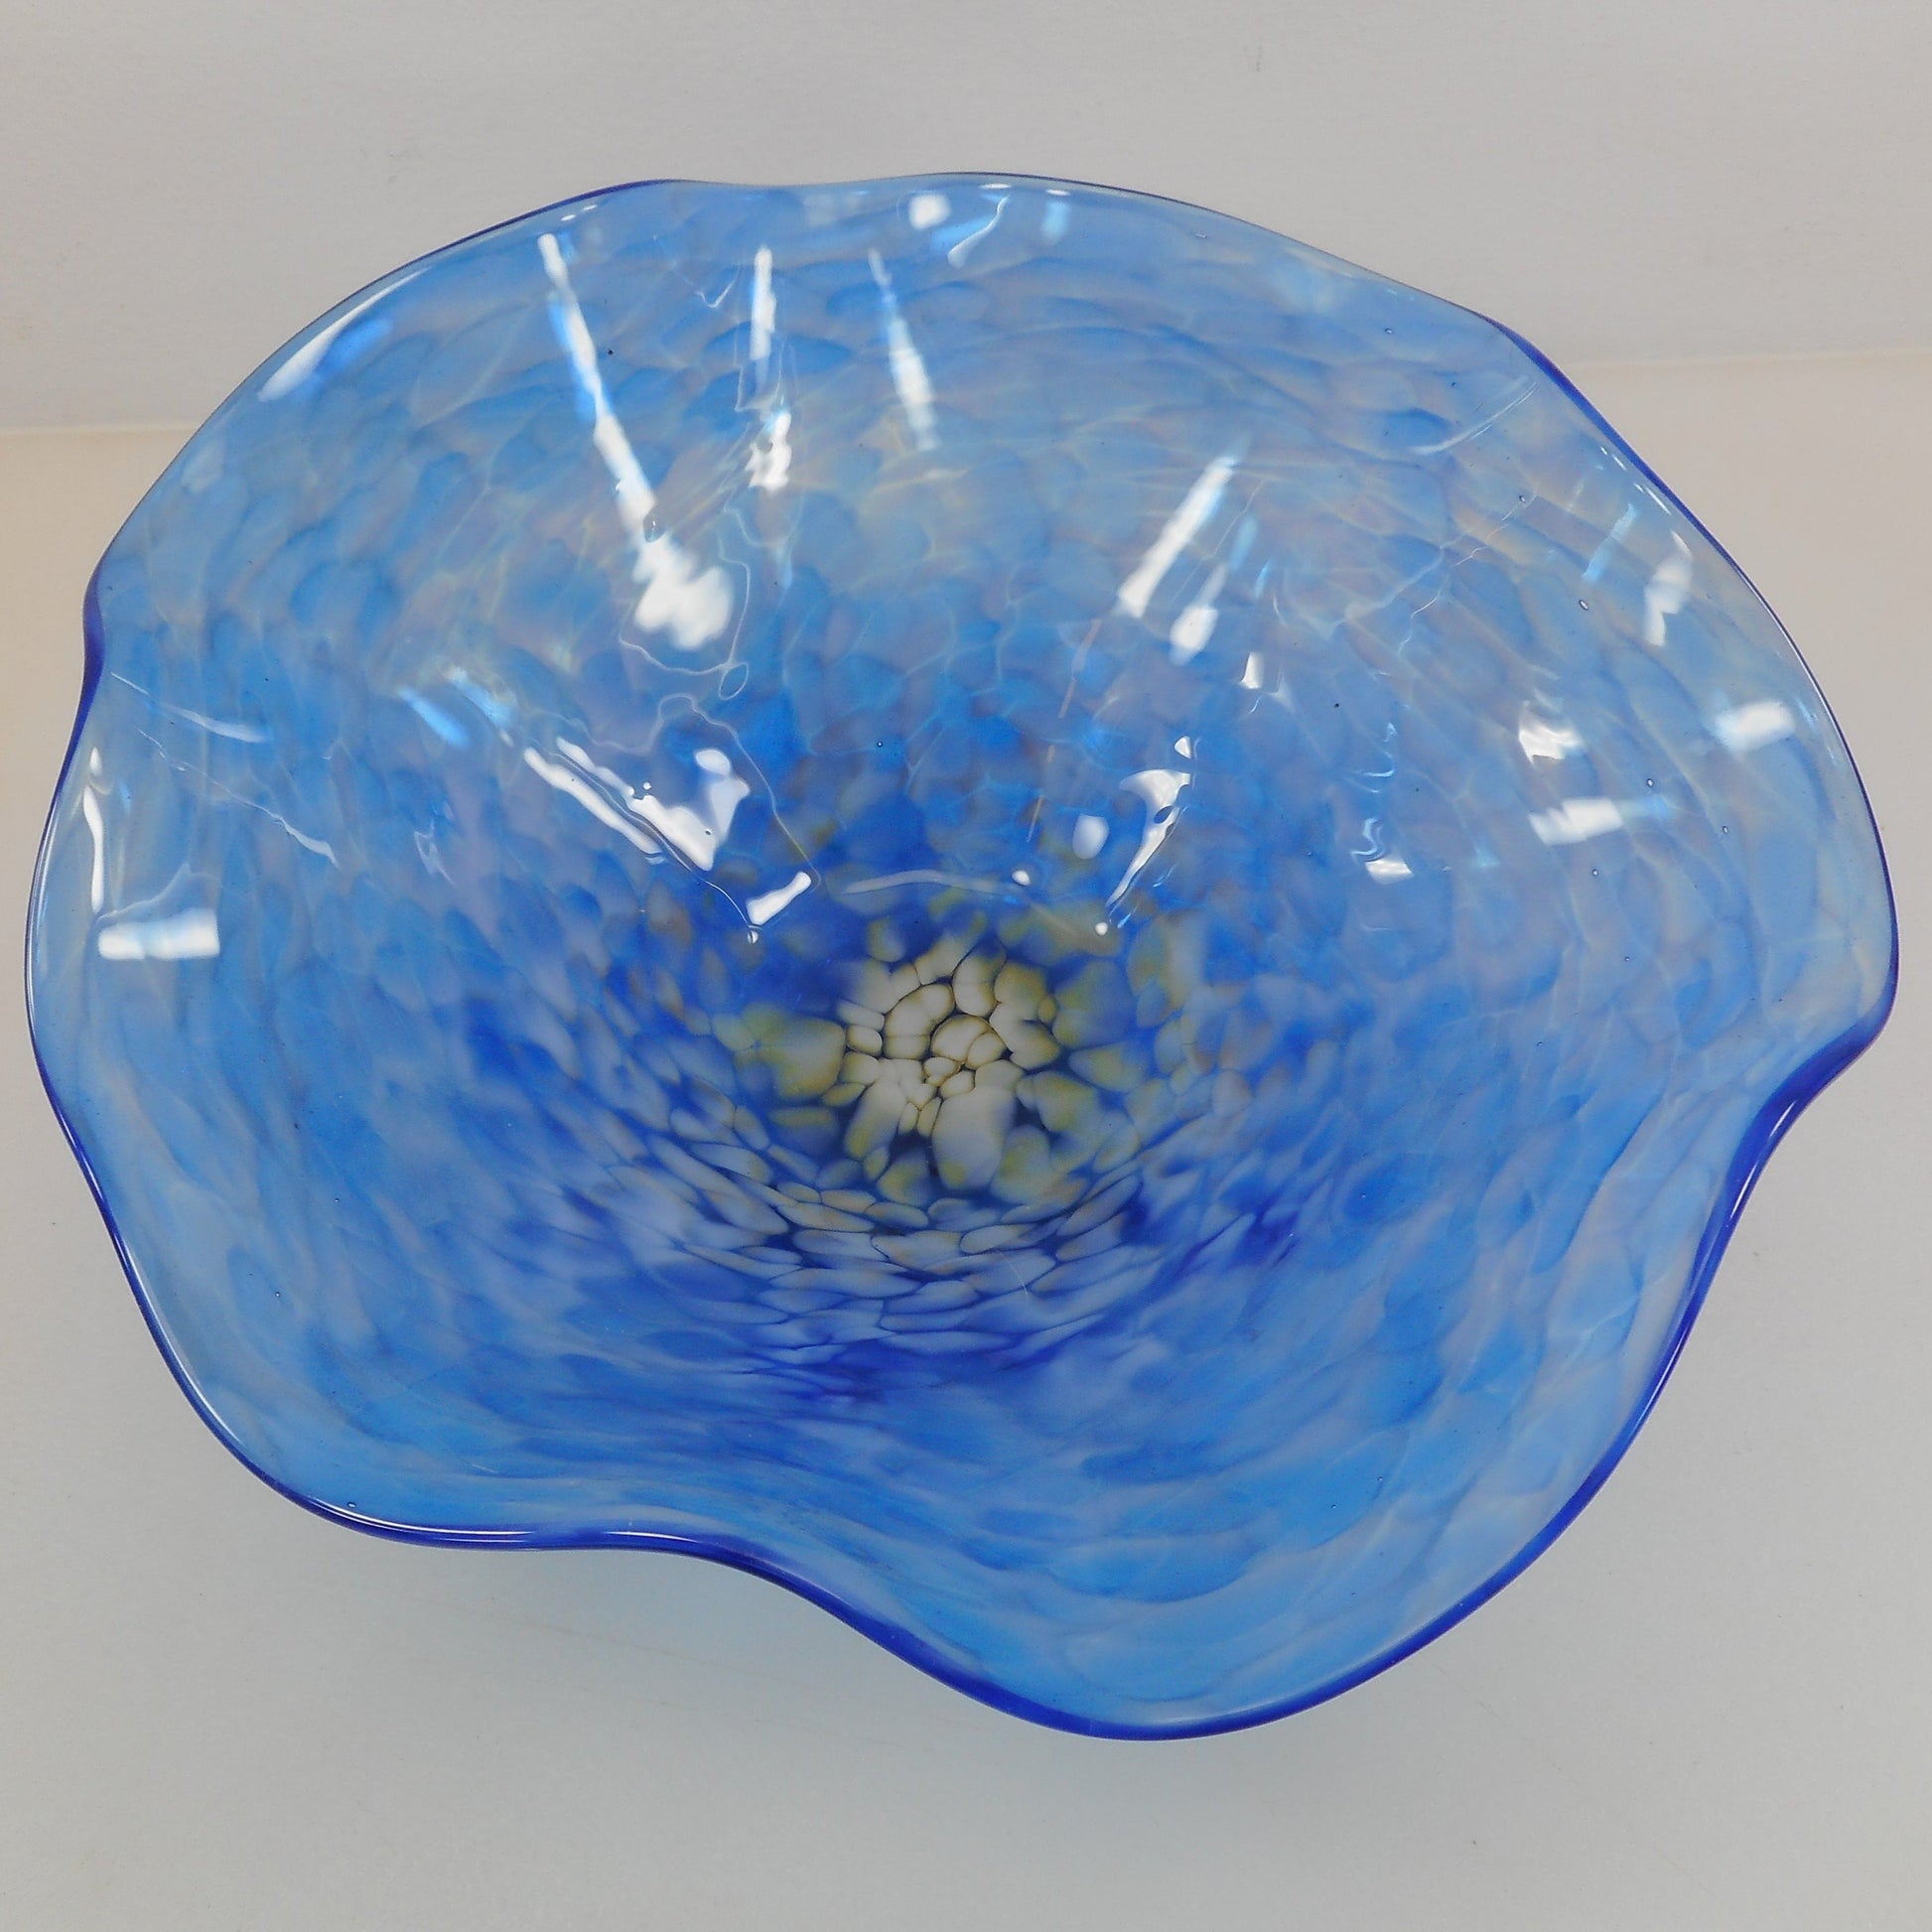 Chad Moriarty Signed Blown Art Glass Bowl 9" - Blue Yellow White Ruffled